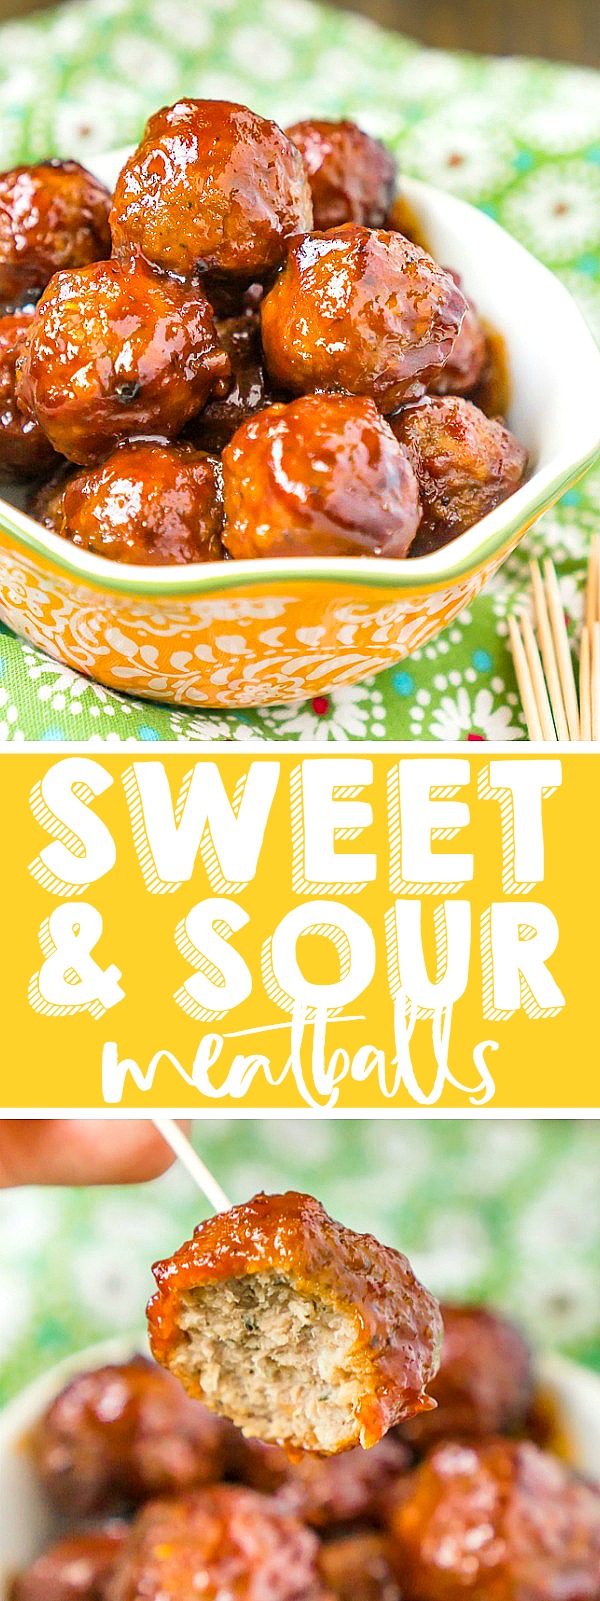 Slow Cooker Sweet and Sour Meatballs is one of the easiest meatball recipes you can make! With only 6 ingredients needed and under 10 minutes of prep work, these make the perfect holiday app or game day food. Plus we even love them for an easy dinner idea! | THE LOVE NERDS #meatballrecipe #holidayappetizer #gamedayfood